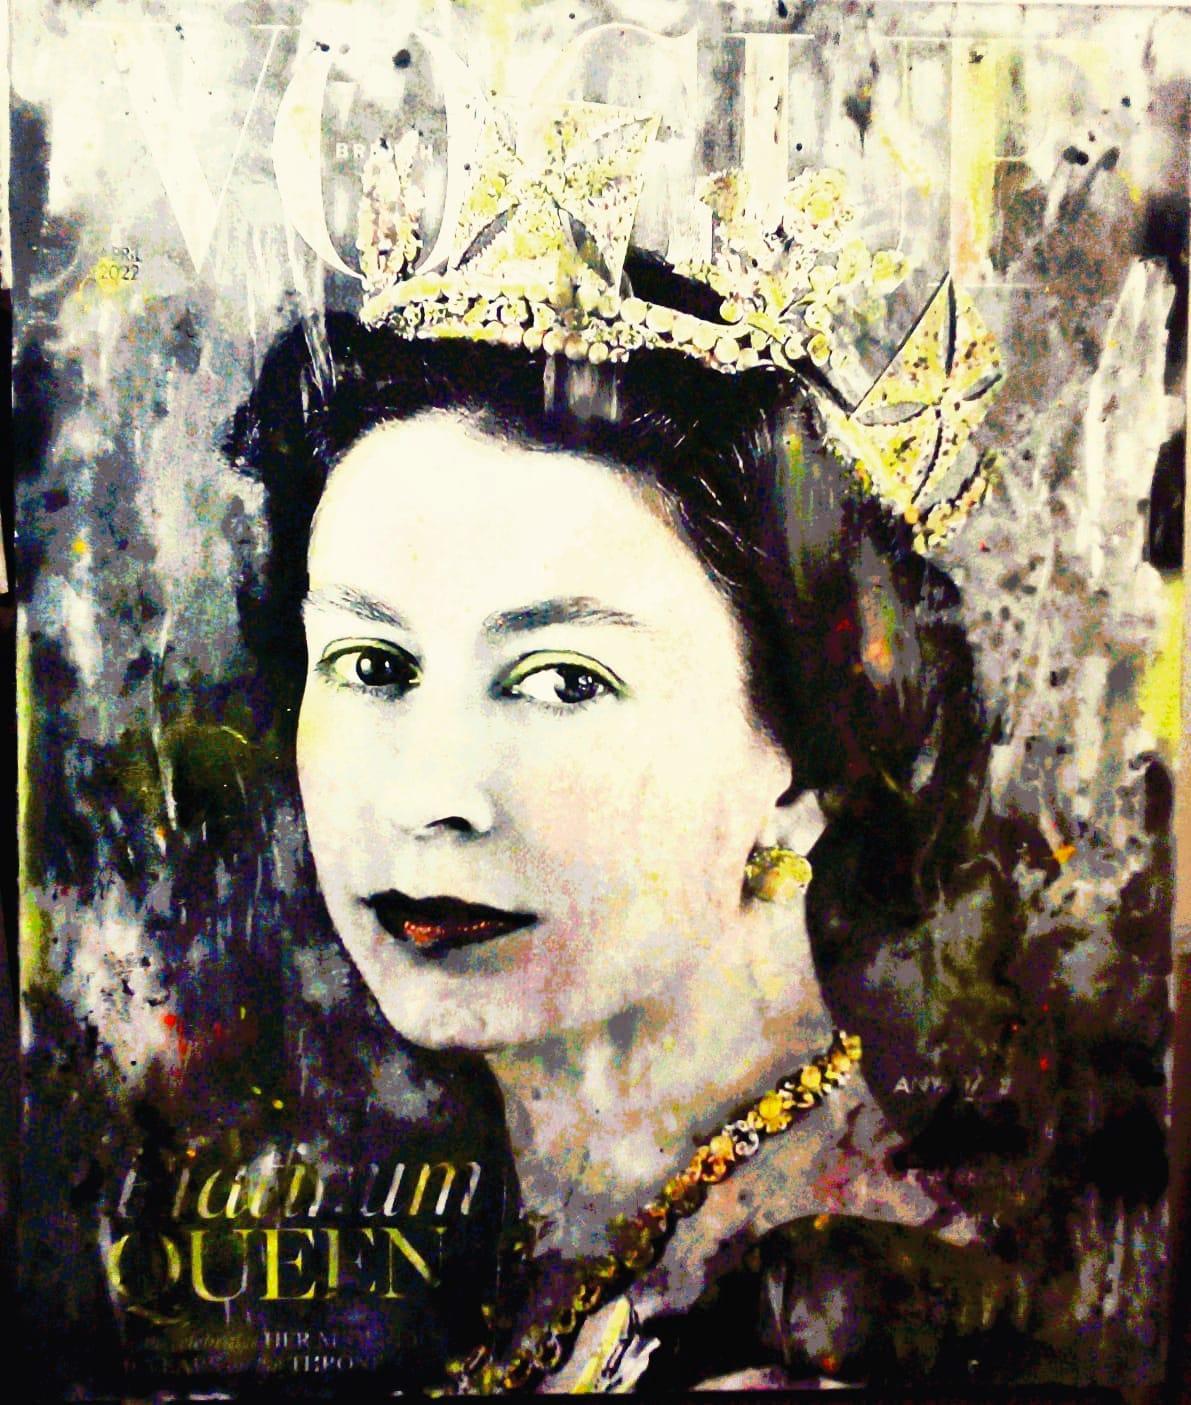 Queen Elisabeth II painted by the artist Anna Bianchi .Anna Bianchi was born in Lucca where she lives and work .The artist reproduces artist , stars and iconic characters protagonists of the contemporary age.In this work she portrays 
Queen